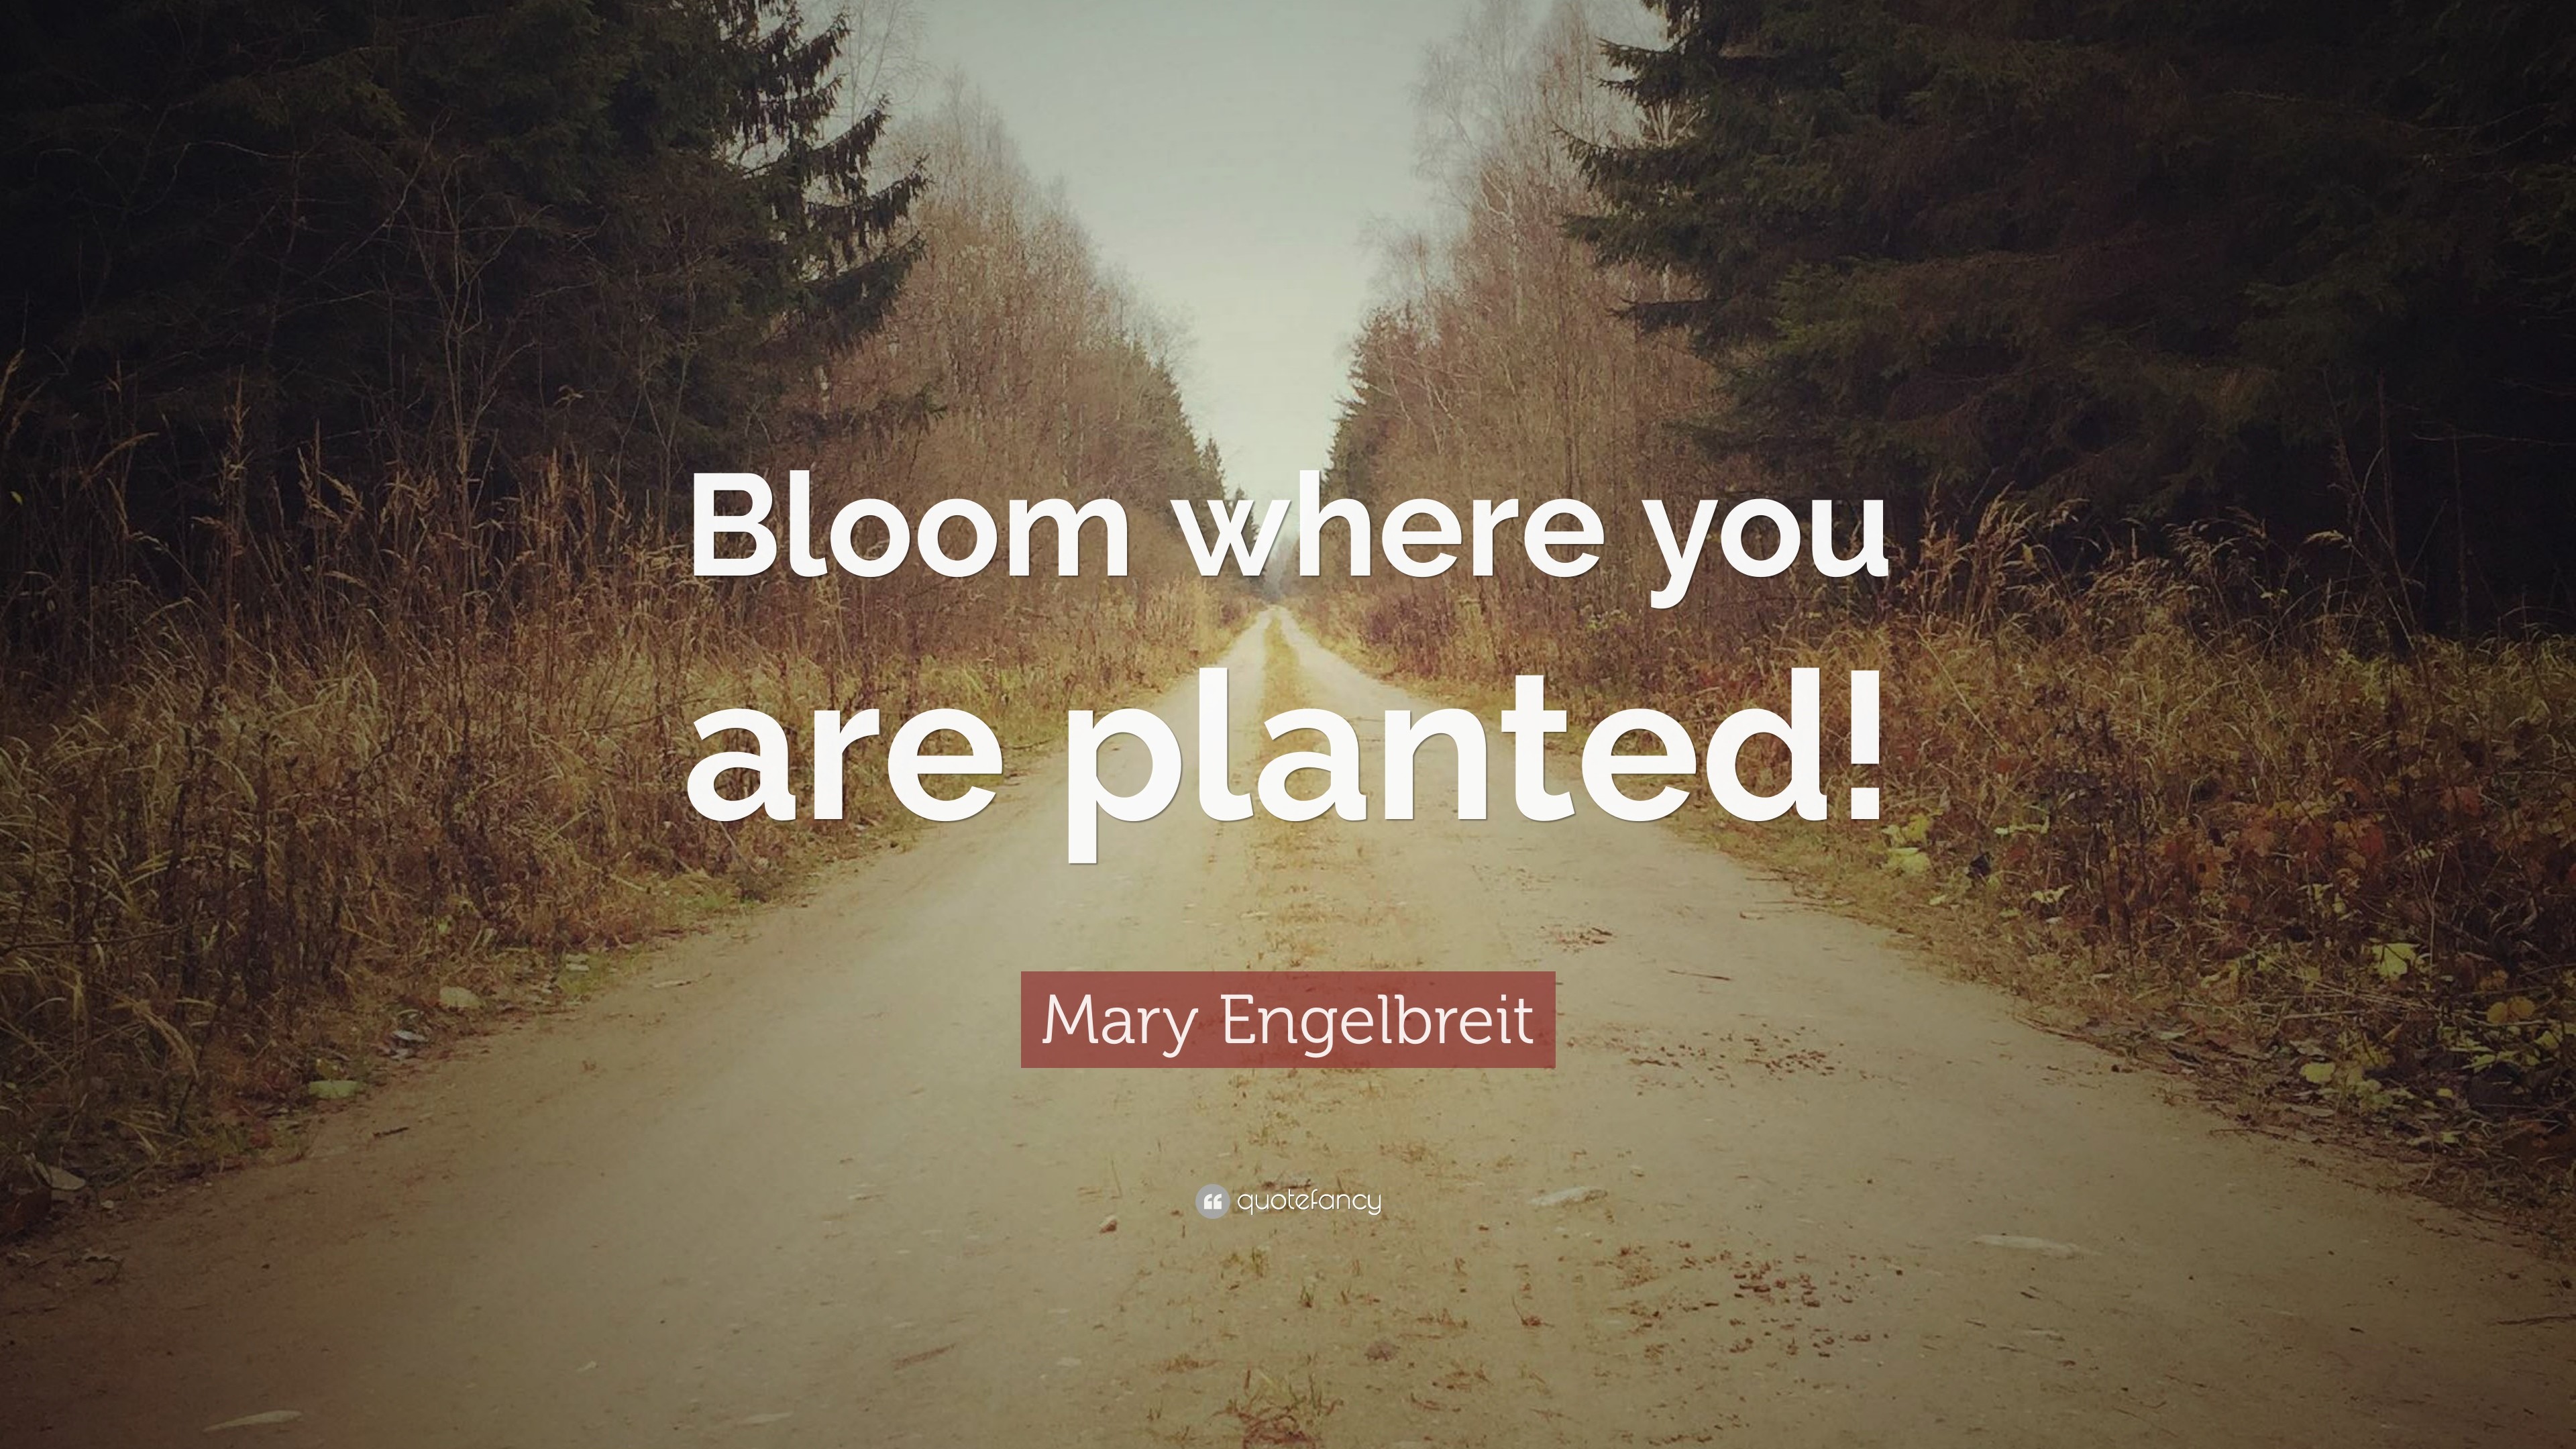 3840x2160 Mary Engelbreit Quote: “Bloom where you are planted!”